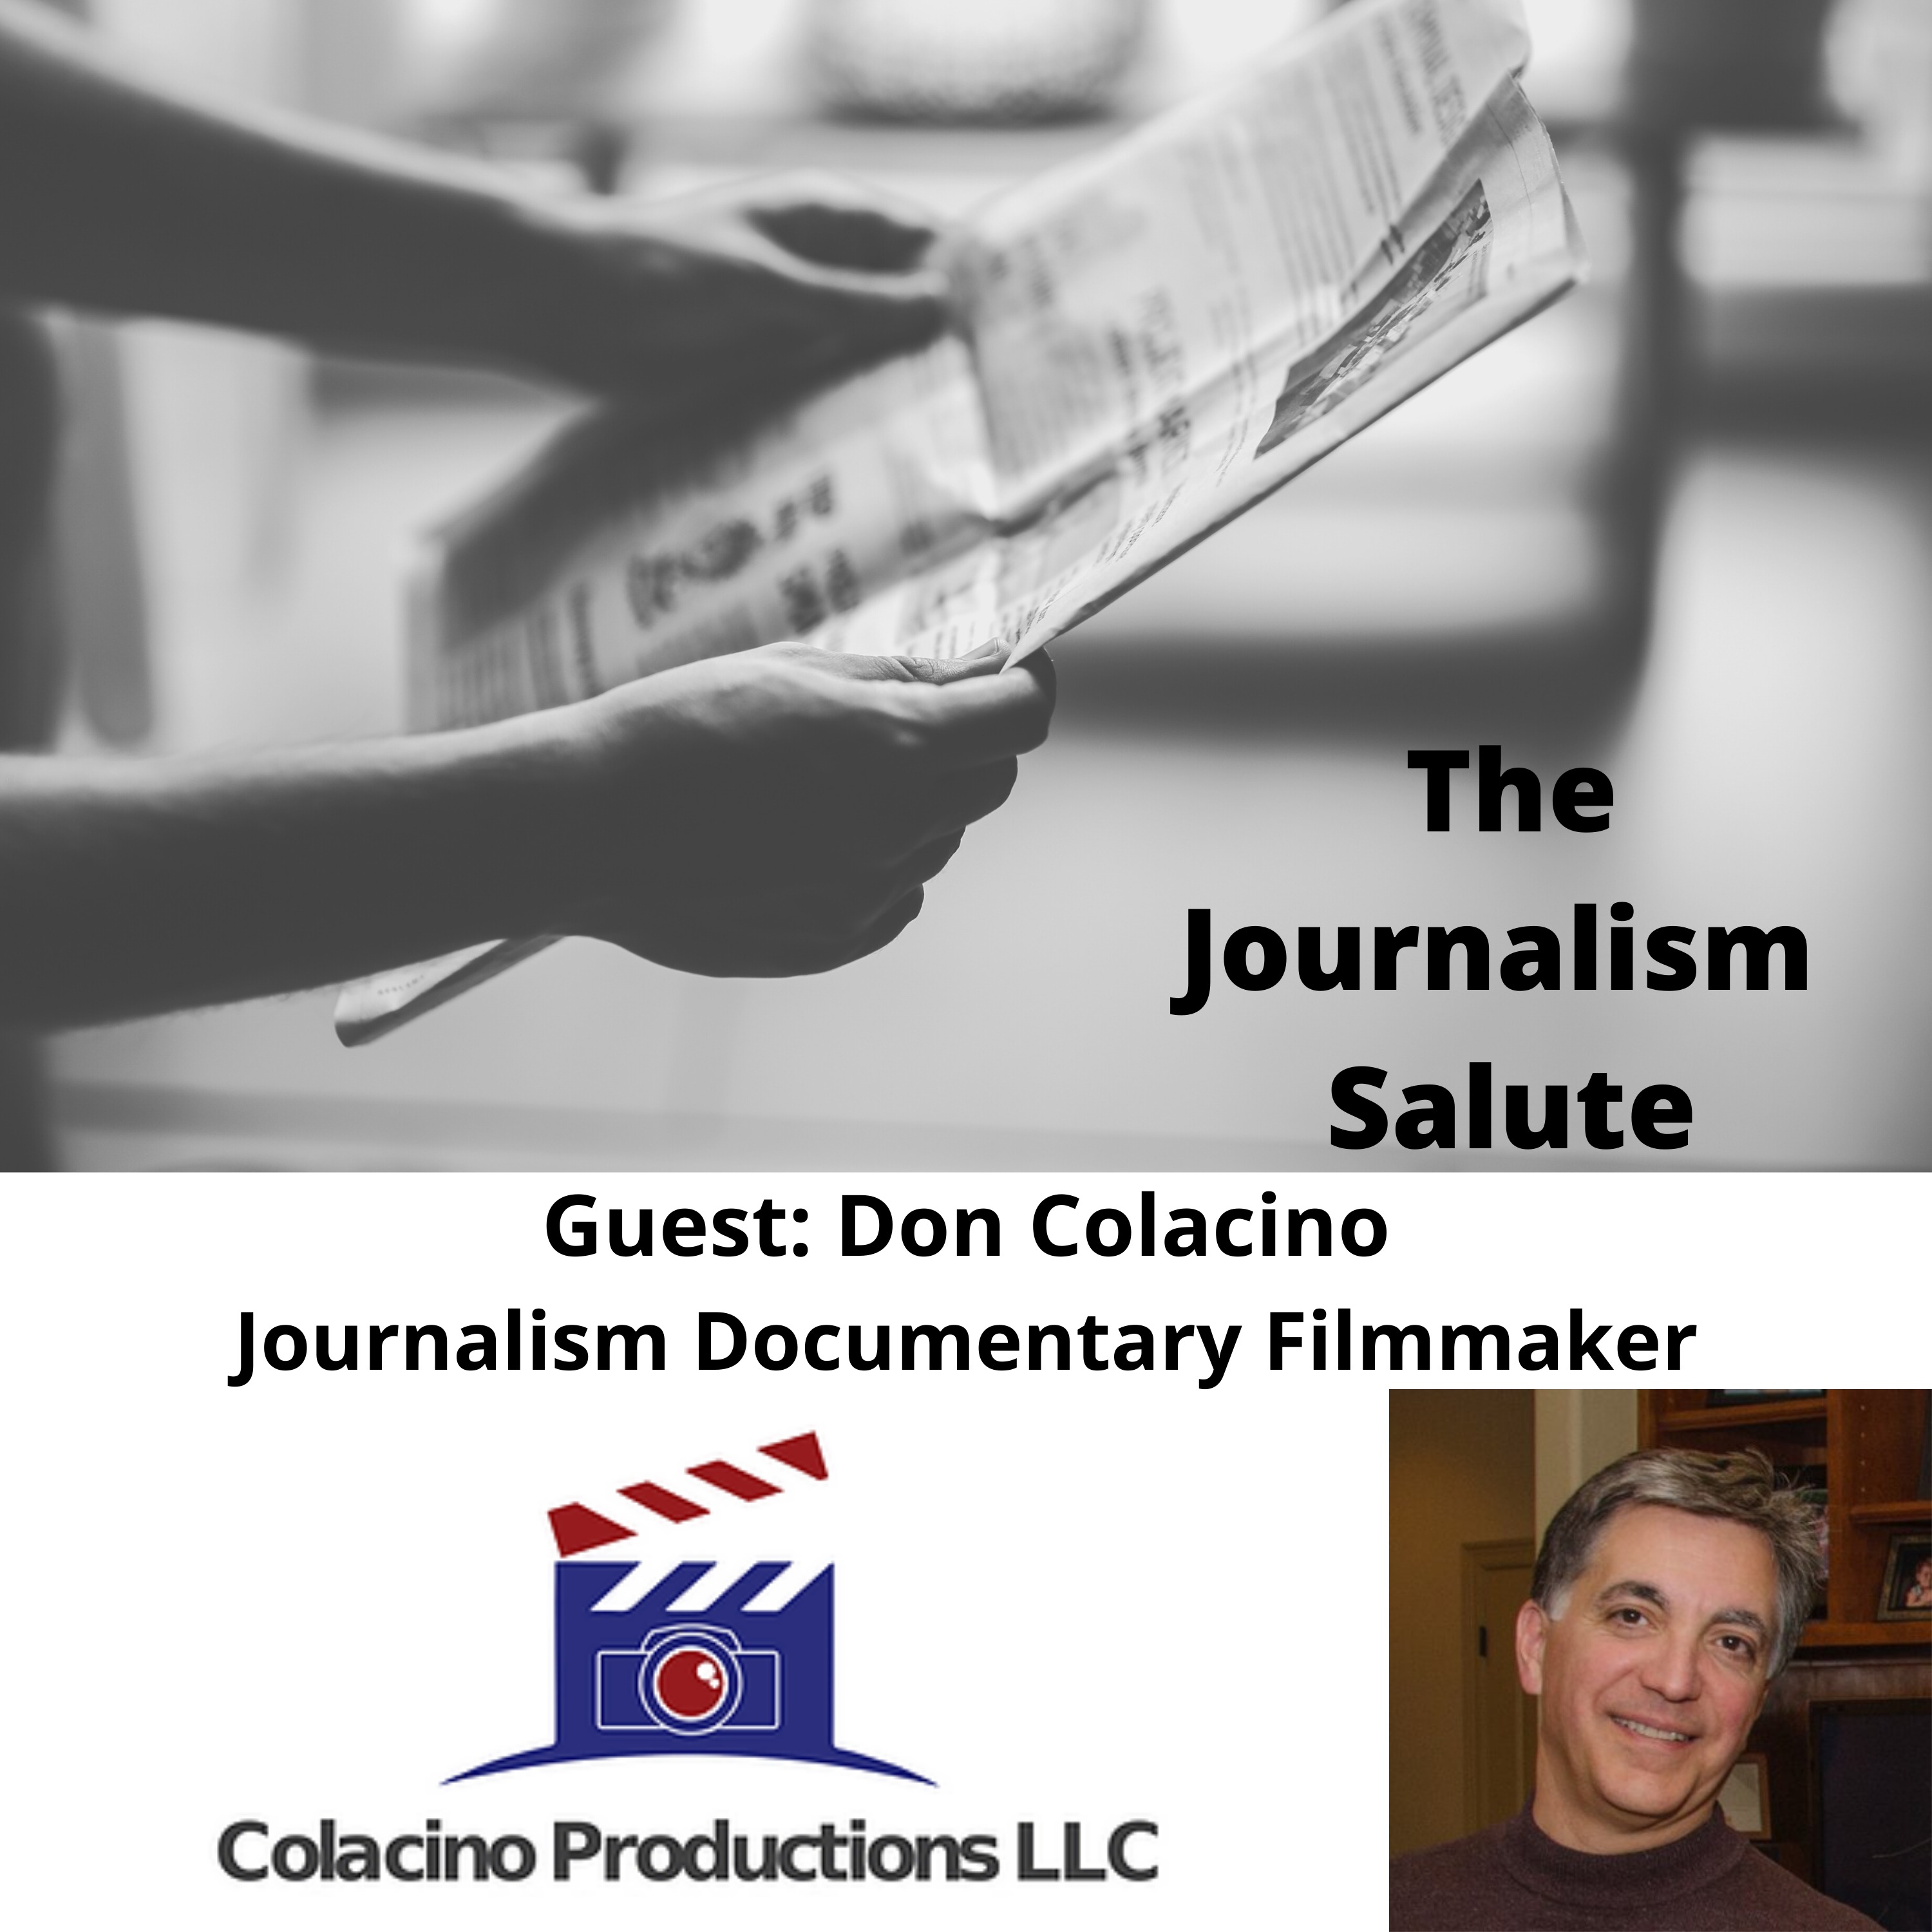 Journalism Documentary Filmmaker Don Colacino (Trusted Sources)